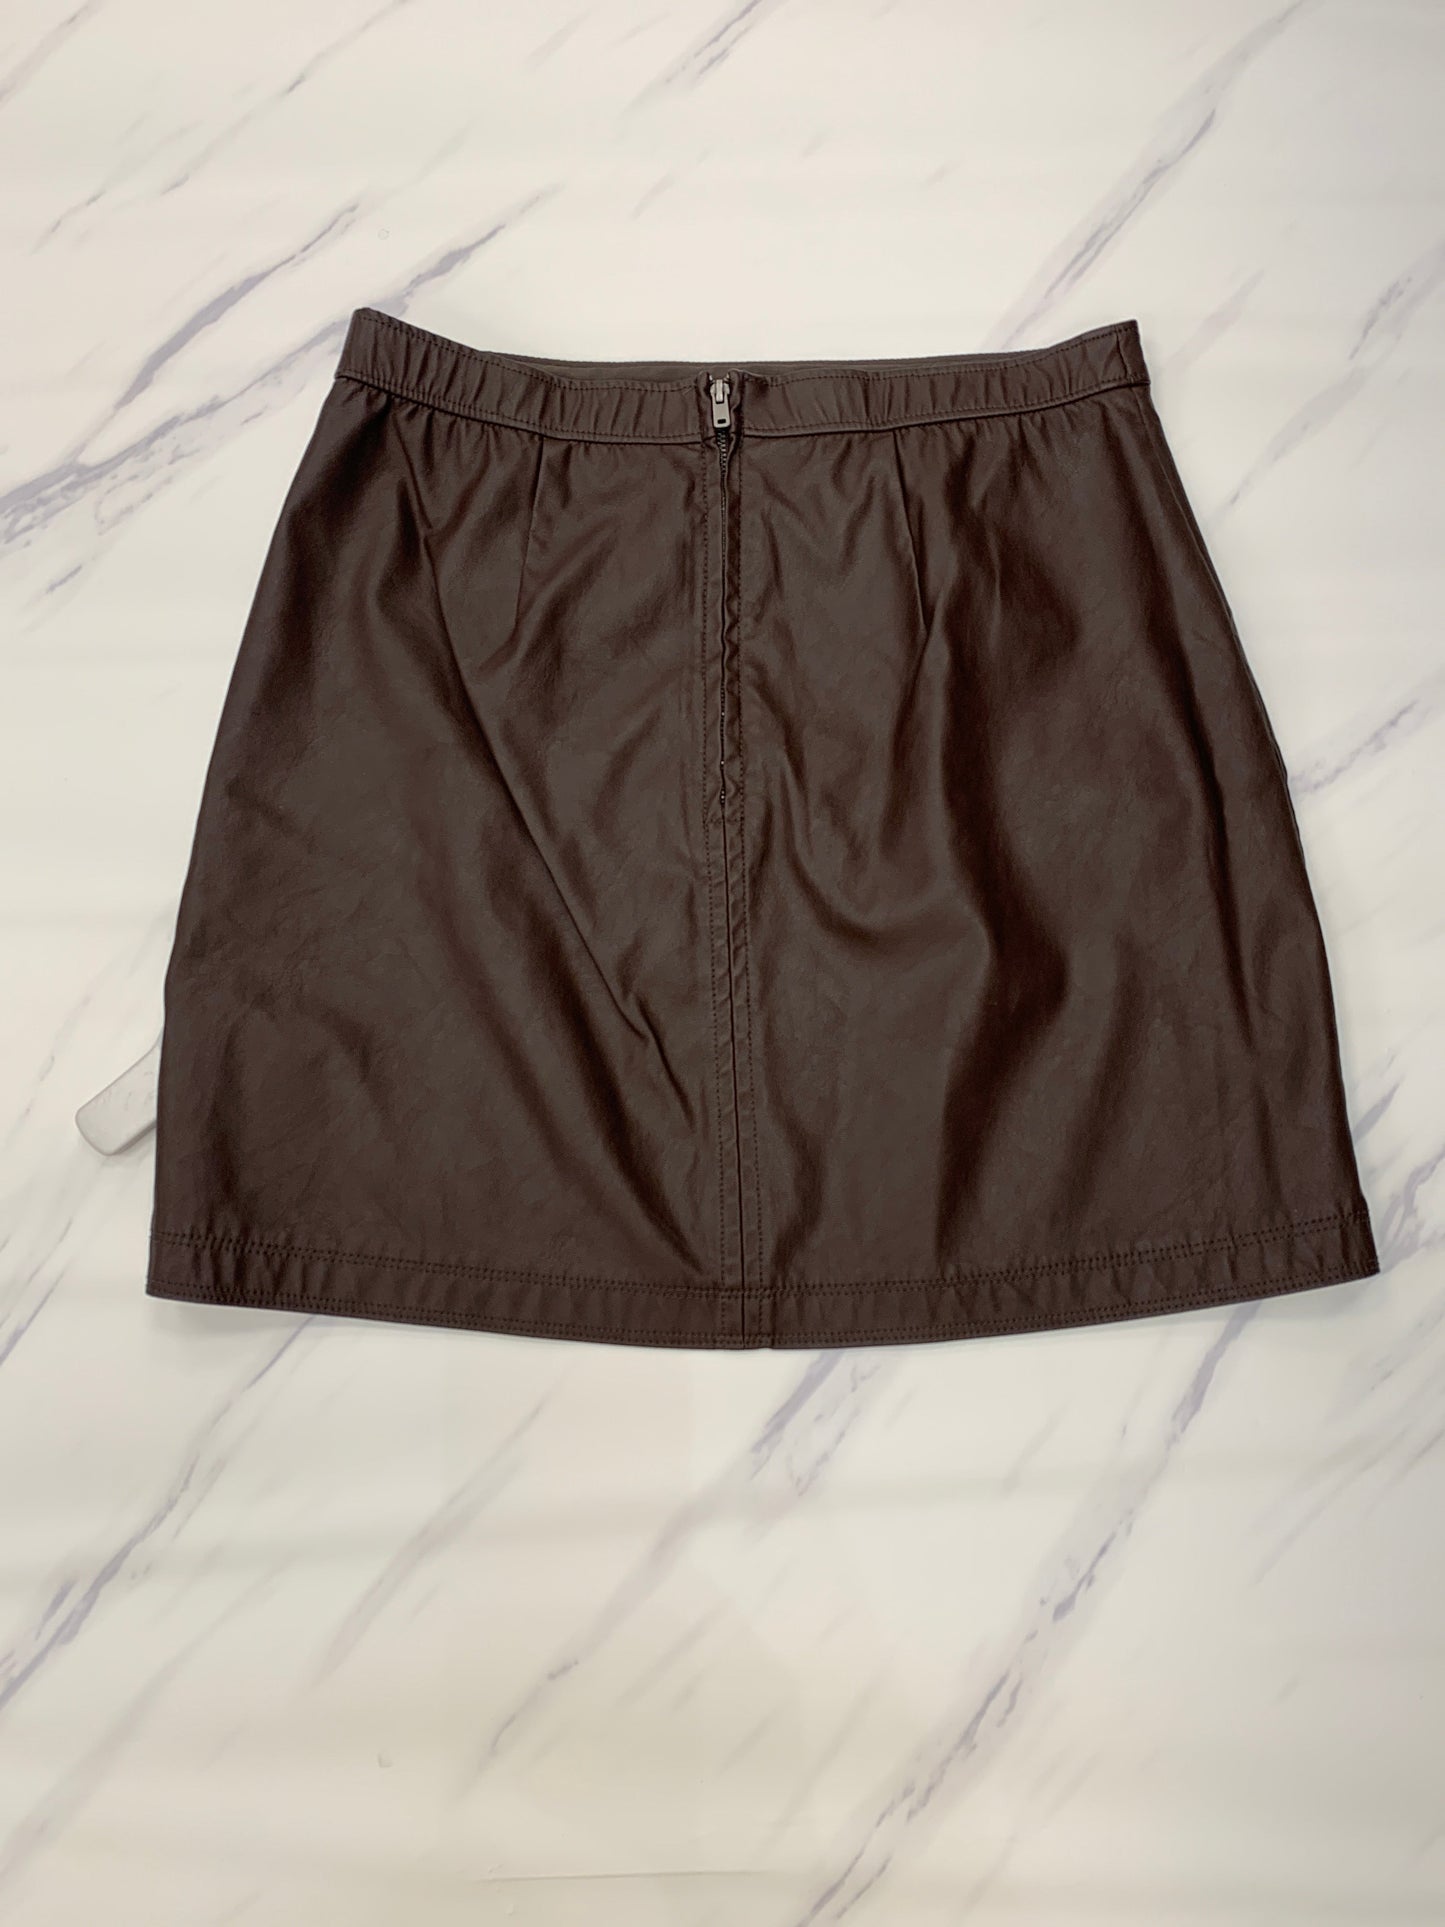 Skirt Mini & Short Abercrombie And Fitch, Size M